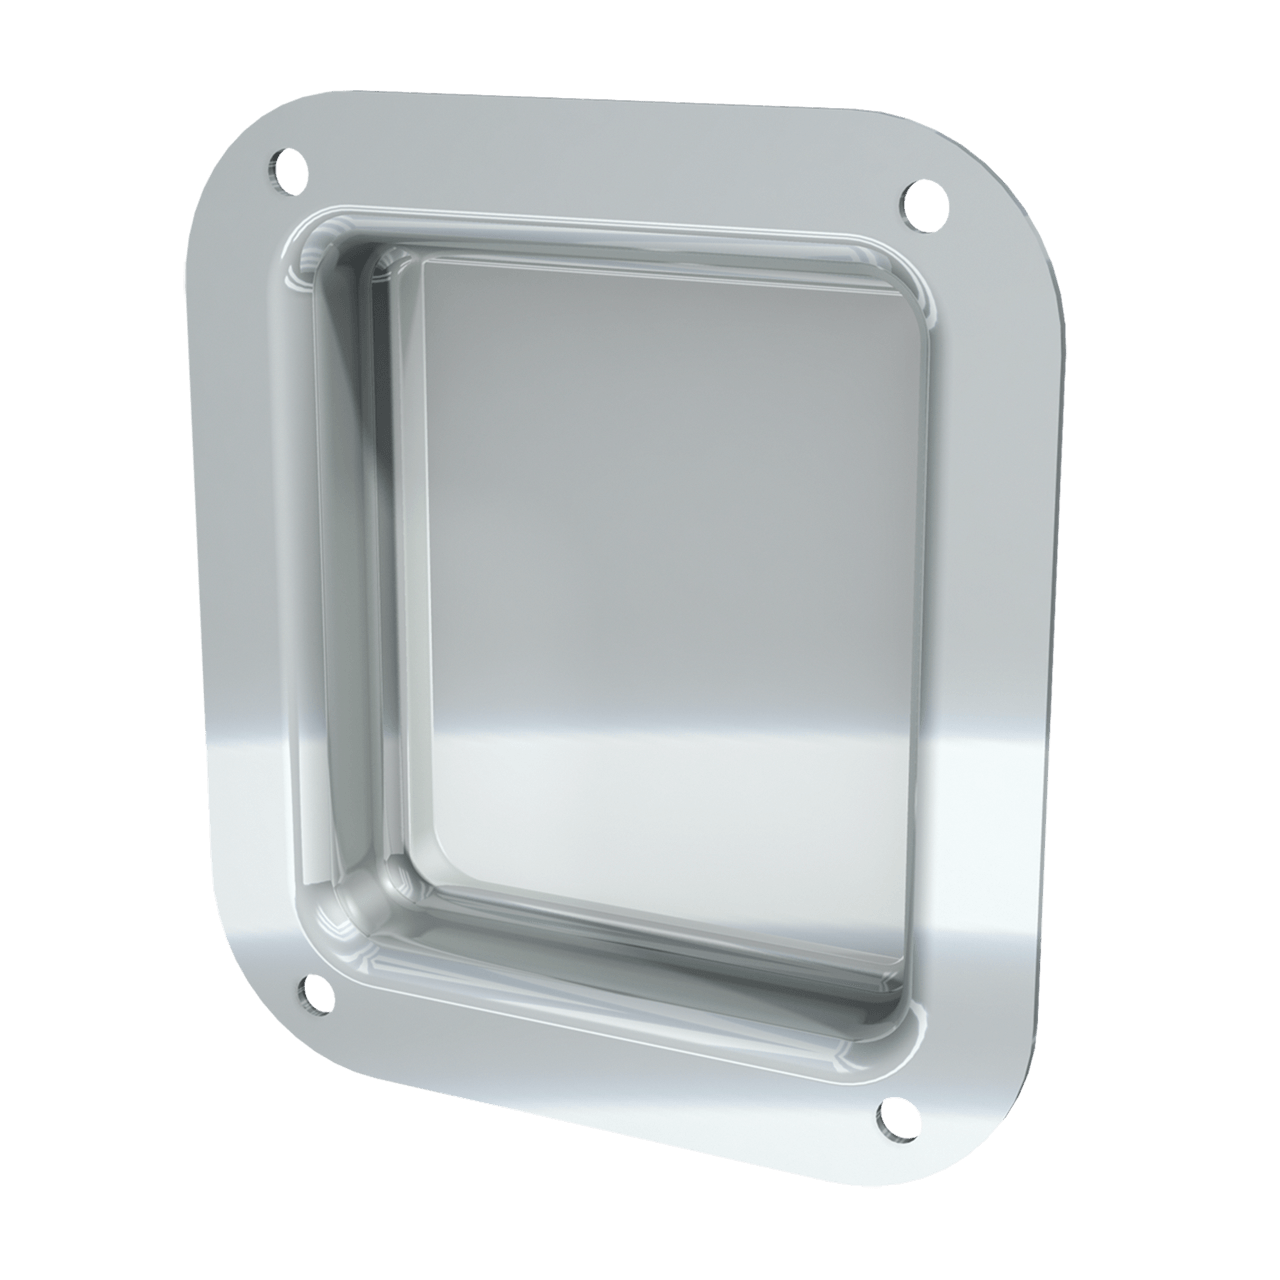 4 x 4-1/2" Recessed Dish, 3/4 view